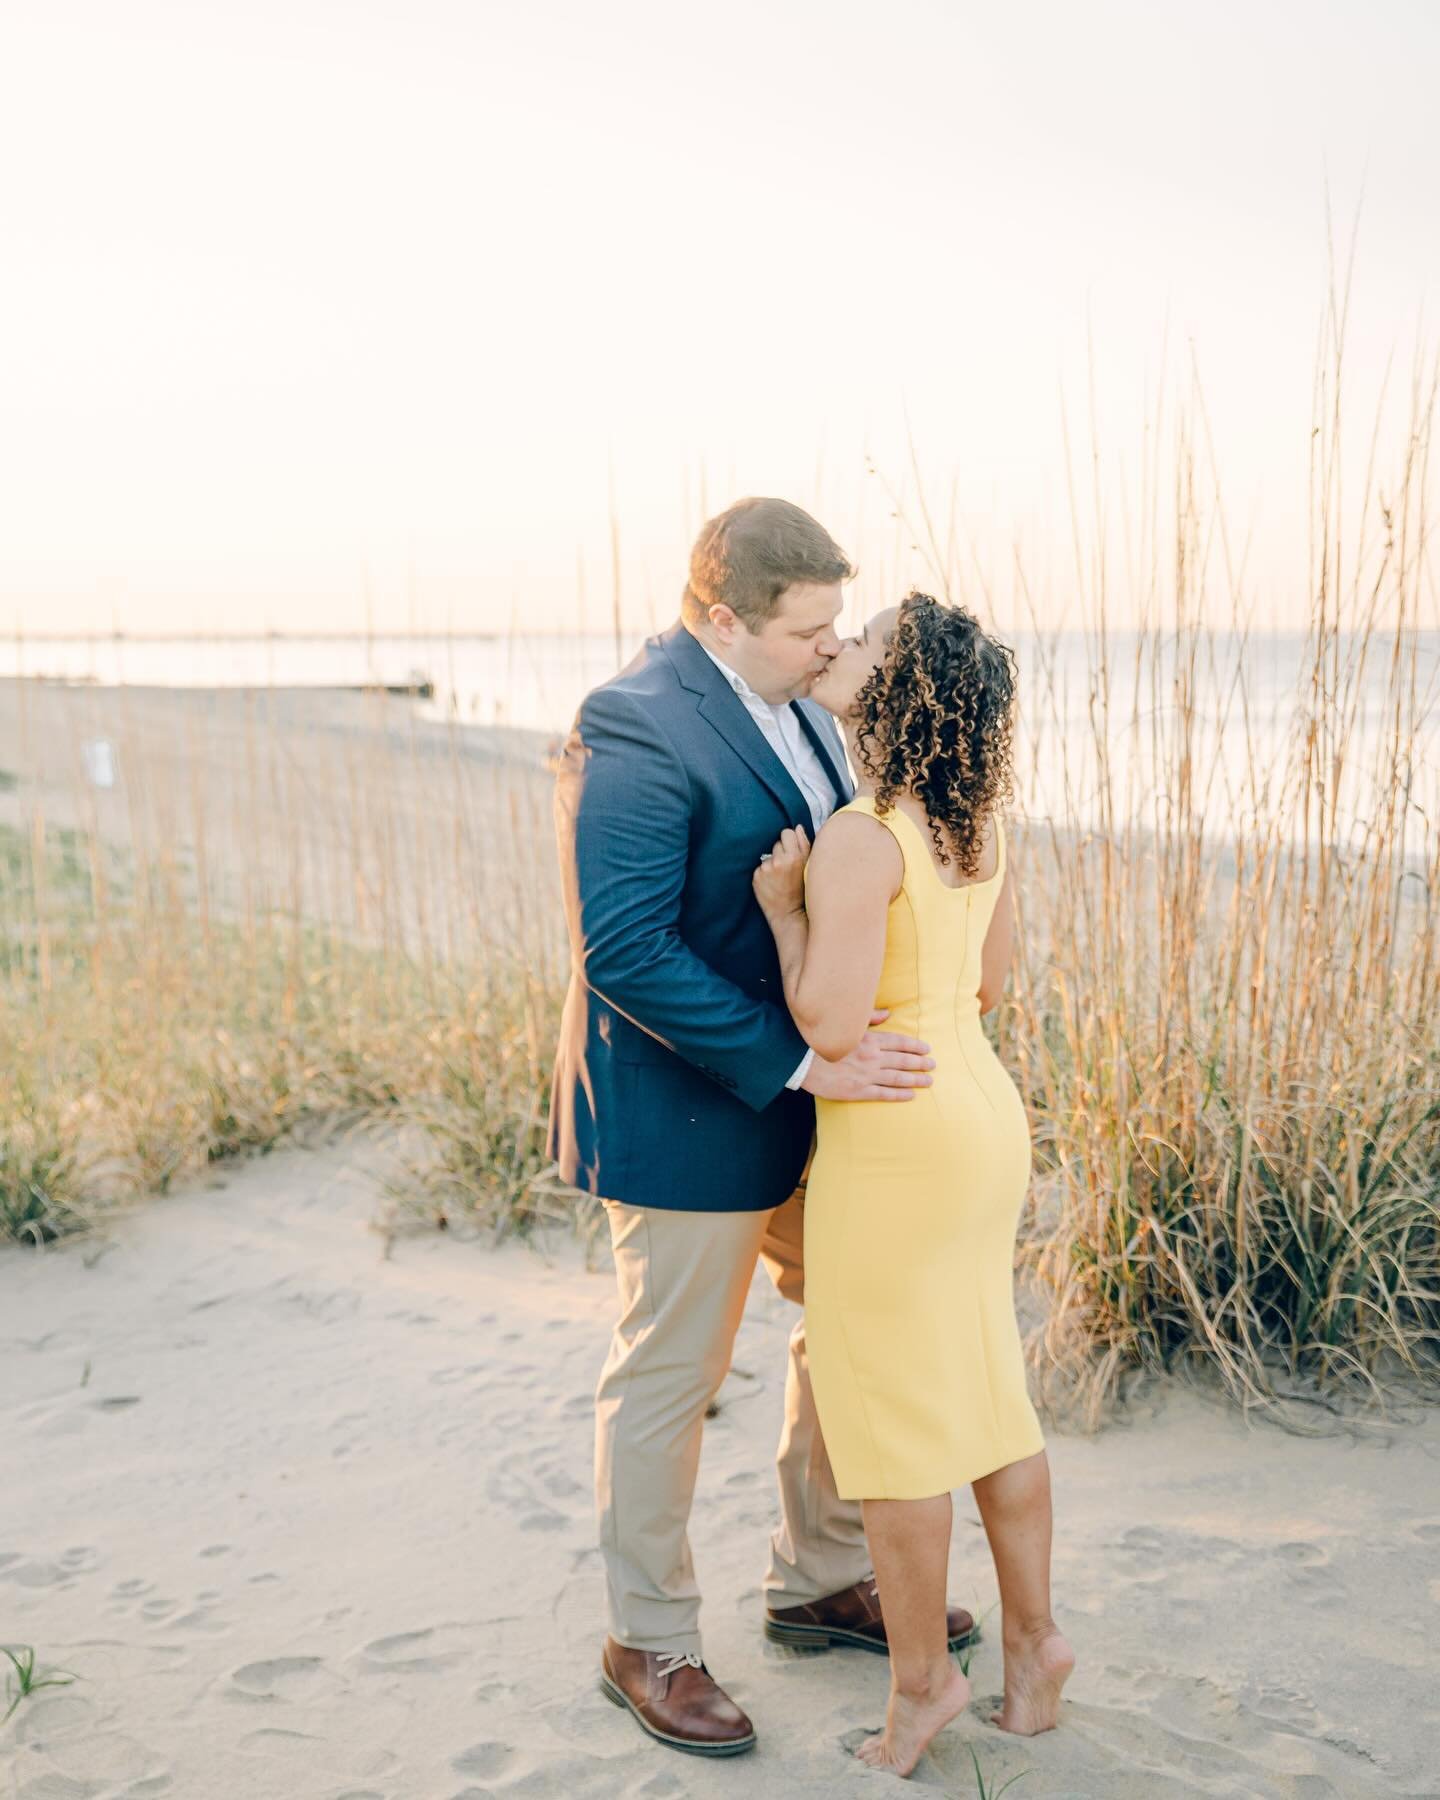 Sunset Beach vibes for K&amp;C&rsquo;s engagement session ✨🥂
.
.
.
#virginiabeachphotographer #virginiabeachwedding #virginiaweddingphotographer #virginiawedding #virginiabride #vawedding #vaweddingphotographer #dcweddingphotographer #dcwedding #ric